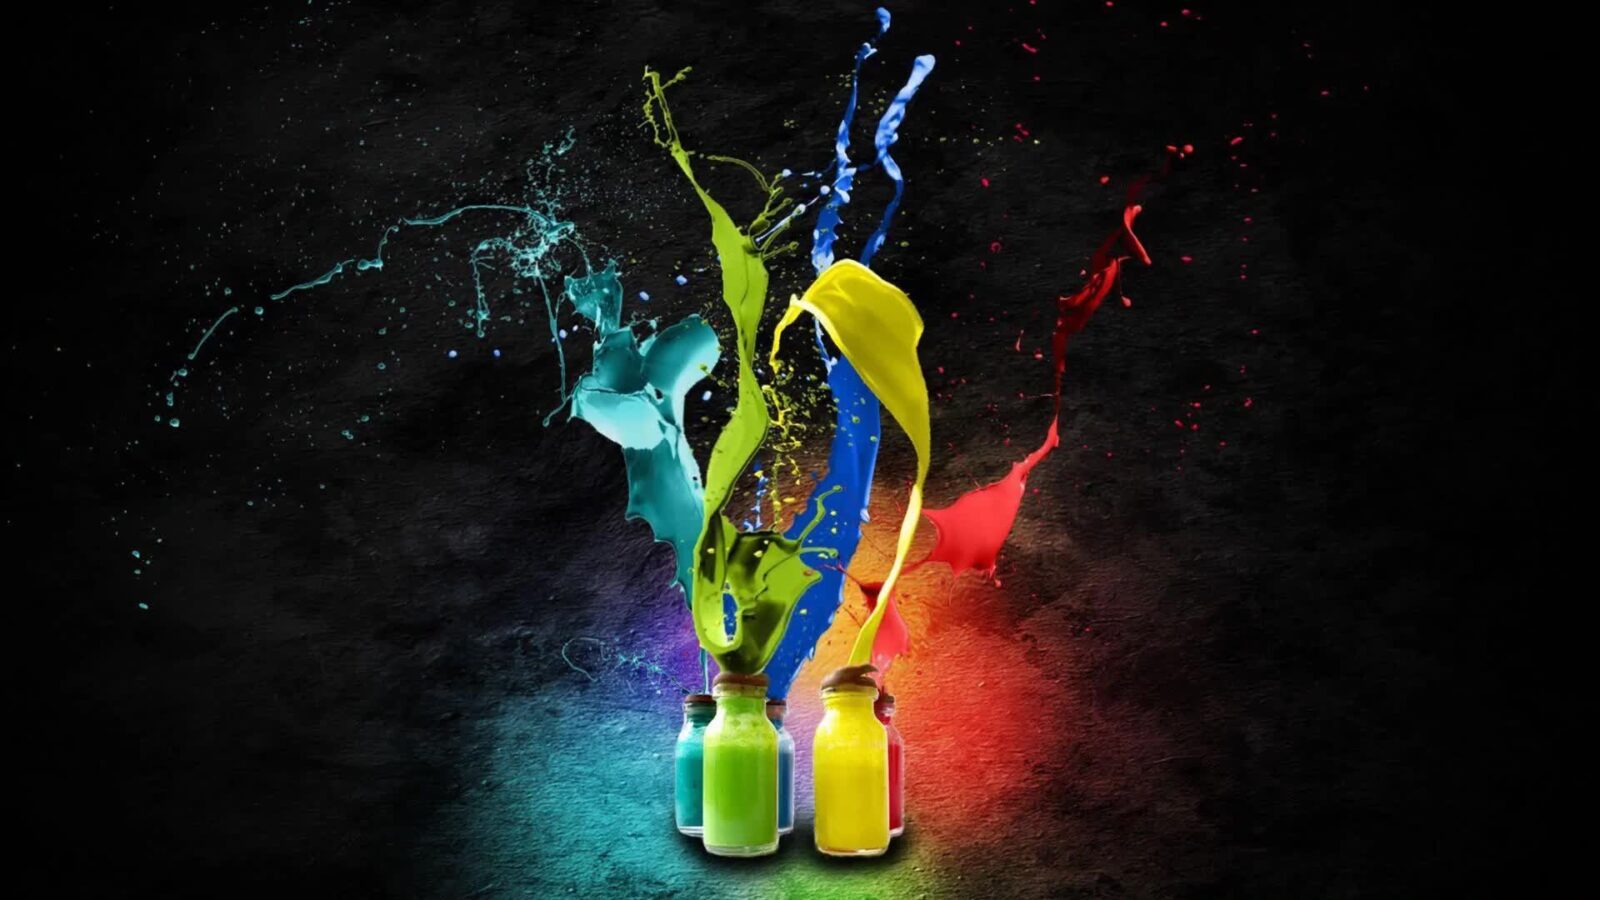 Colorful Ink Explosion - Abstract Live Wallpaper - Live Desktop Wallpapers